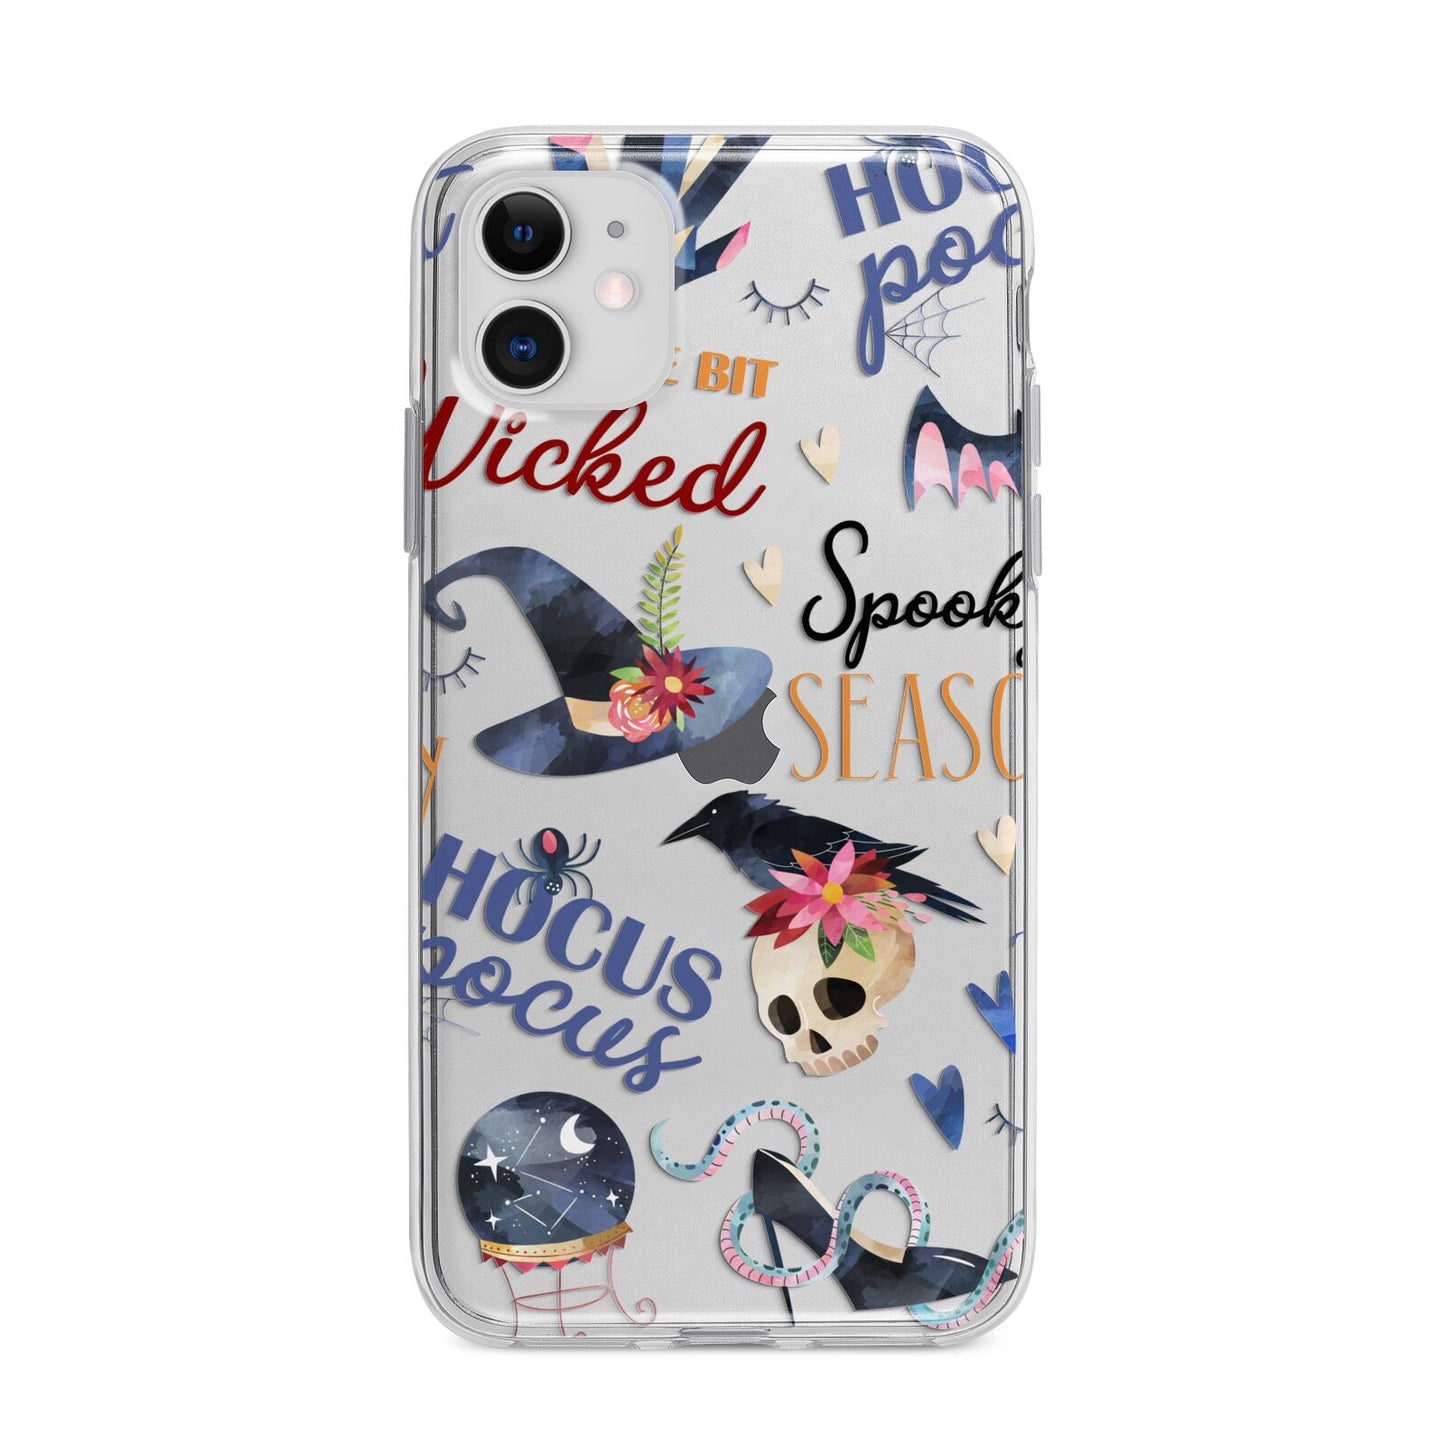 Fun Halloween Catchphrases and Watercolour Illustrations Apple iPhone 11 in White with Bumper Case